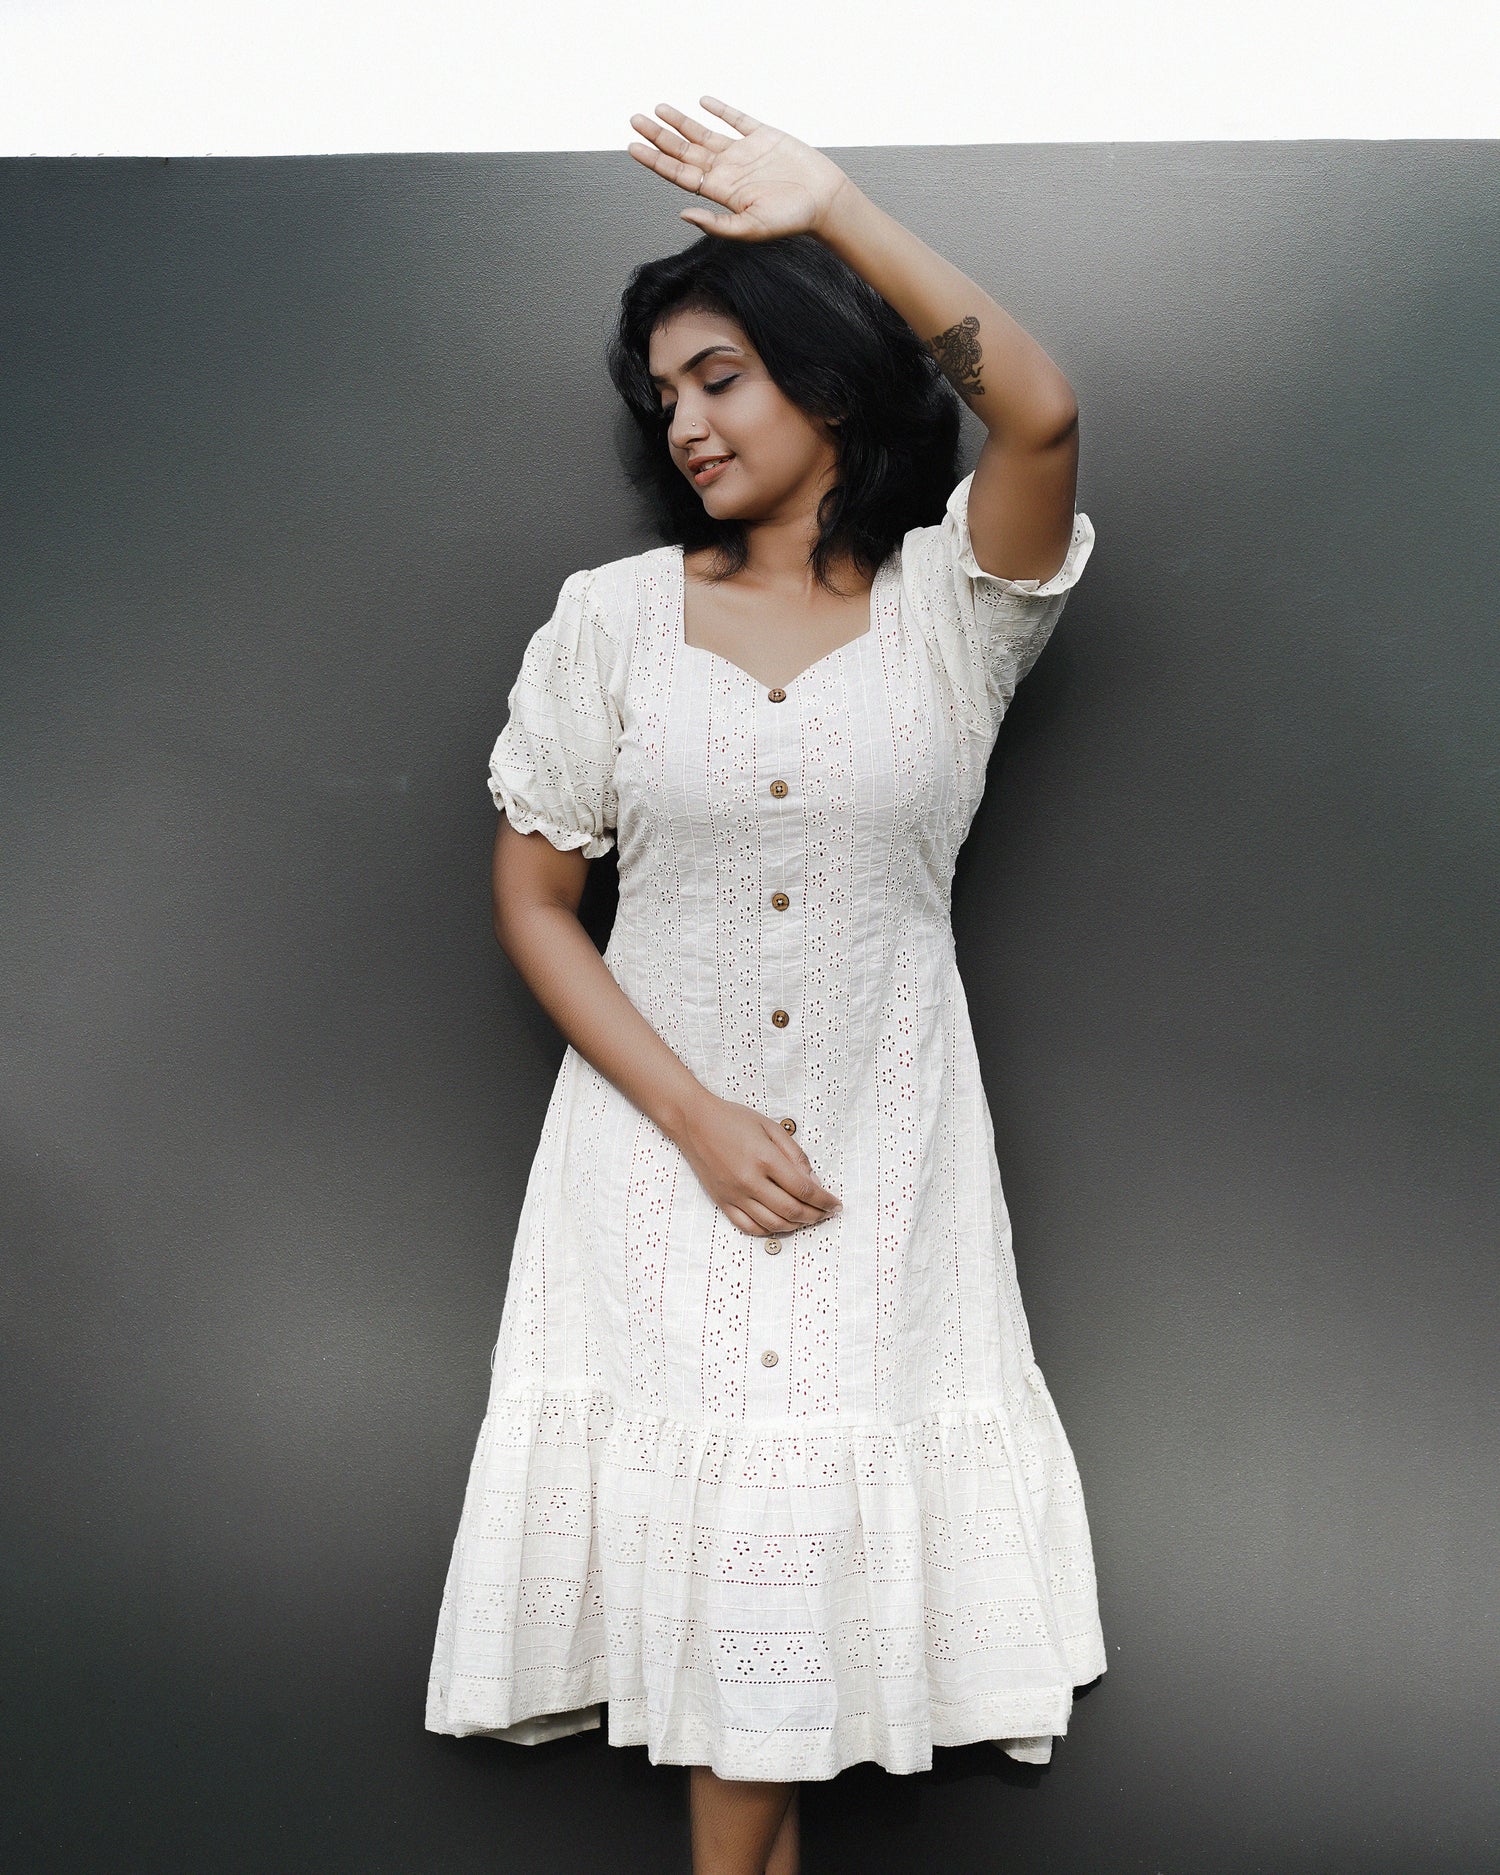 Buy White Cotton Embroidered Hakoba Dress Material at Amazon.in